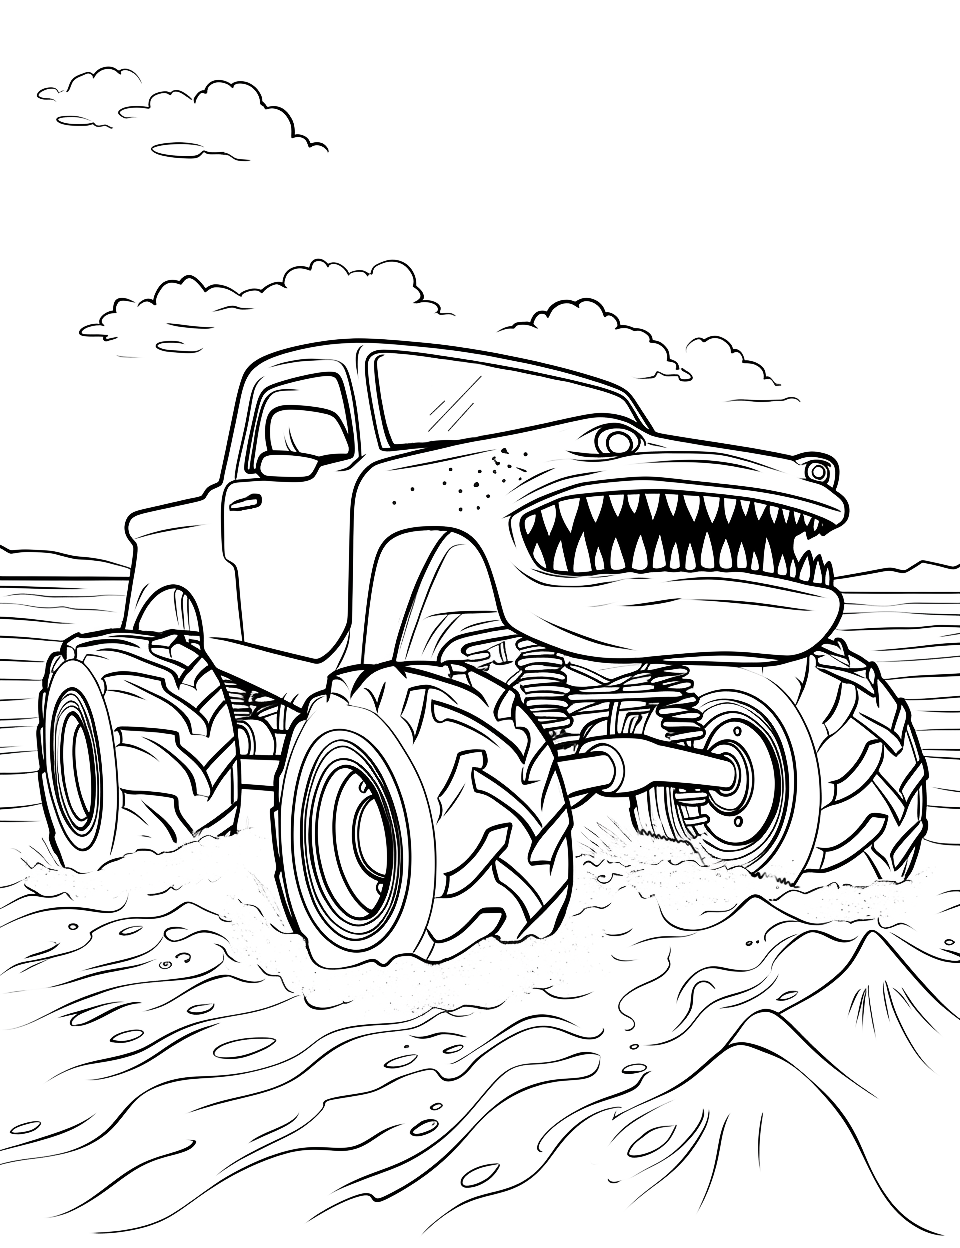 Tiger Shark Attack Monster Truck Coloring Page - Tiger Shark monster truck roaring down a sandy beach.